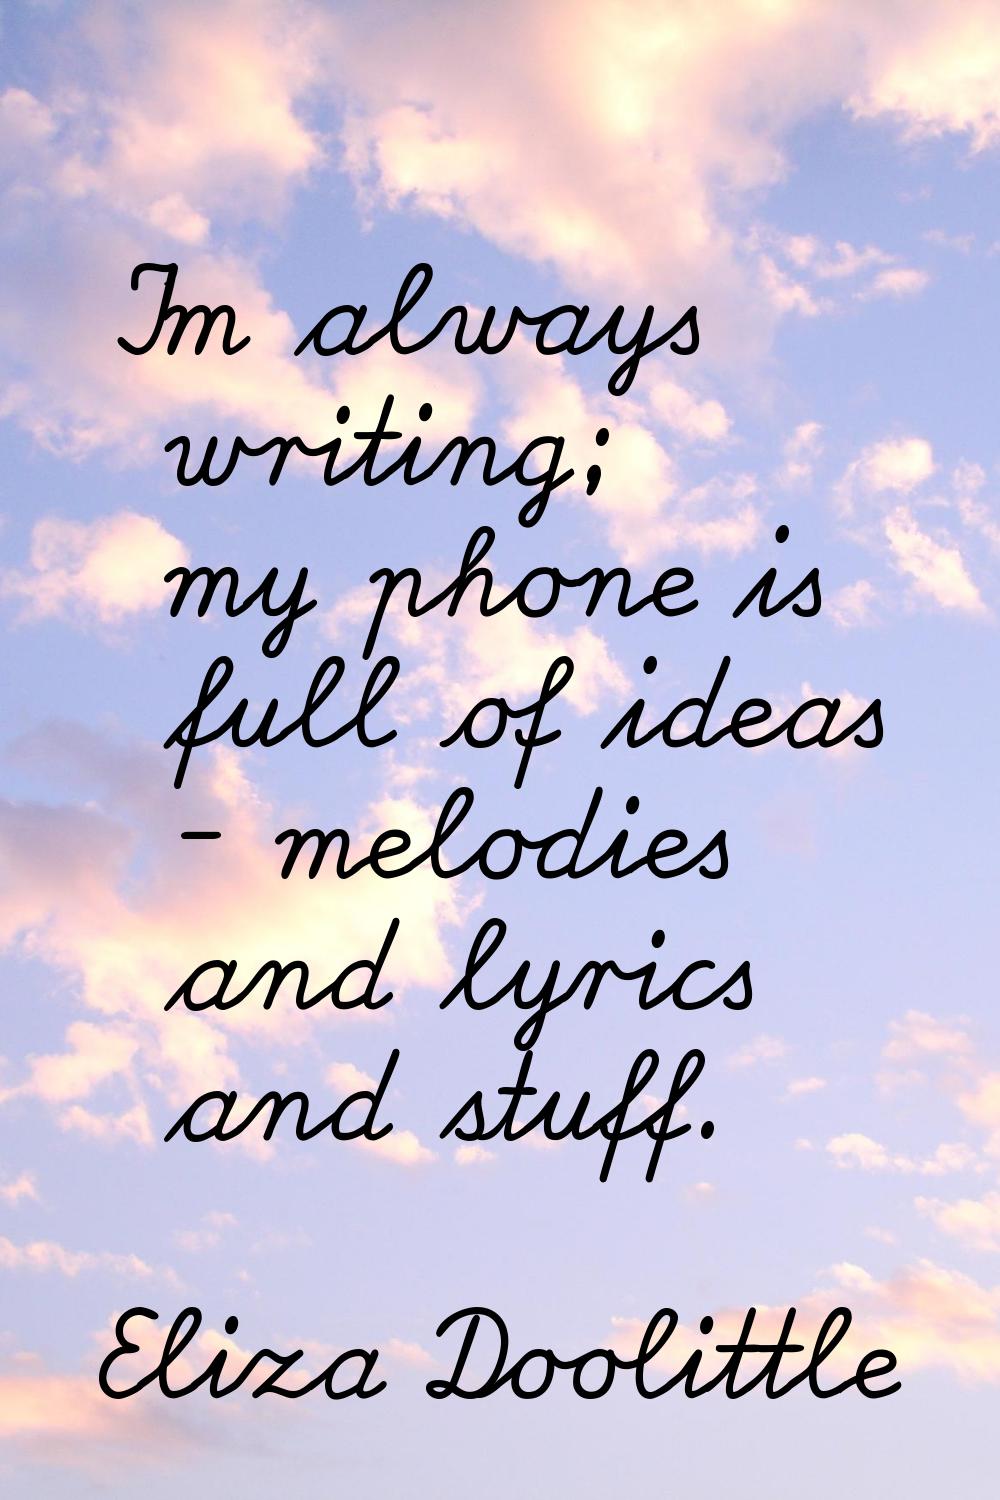 I'm always writing; my phone is full of ideas - melodies and lyrics and stuff.